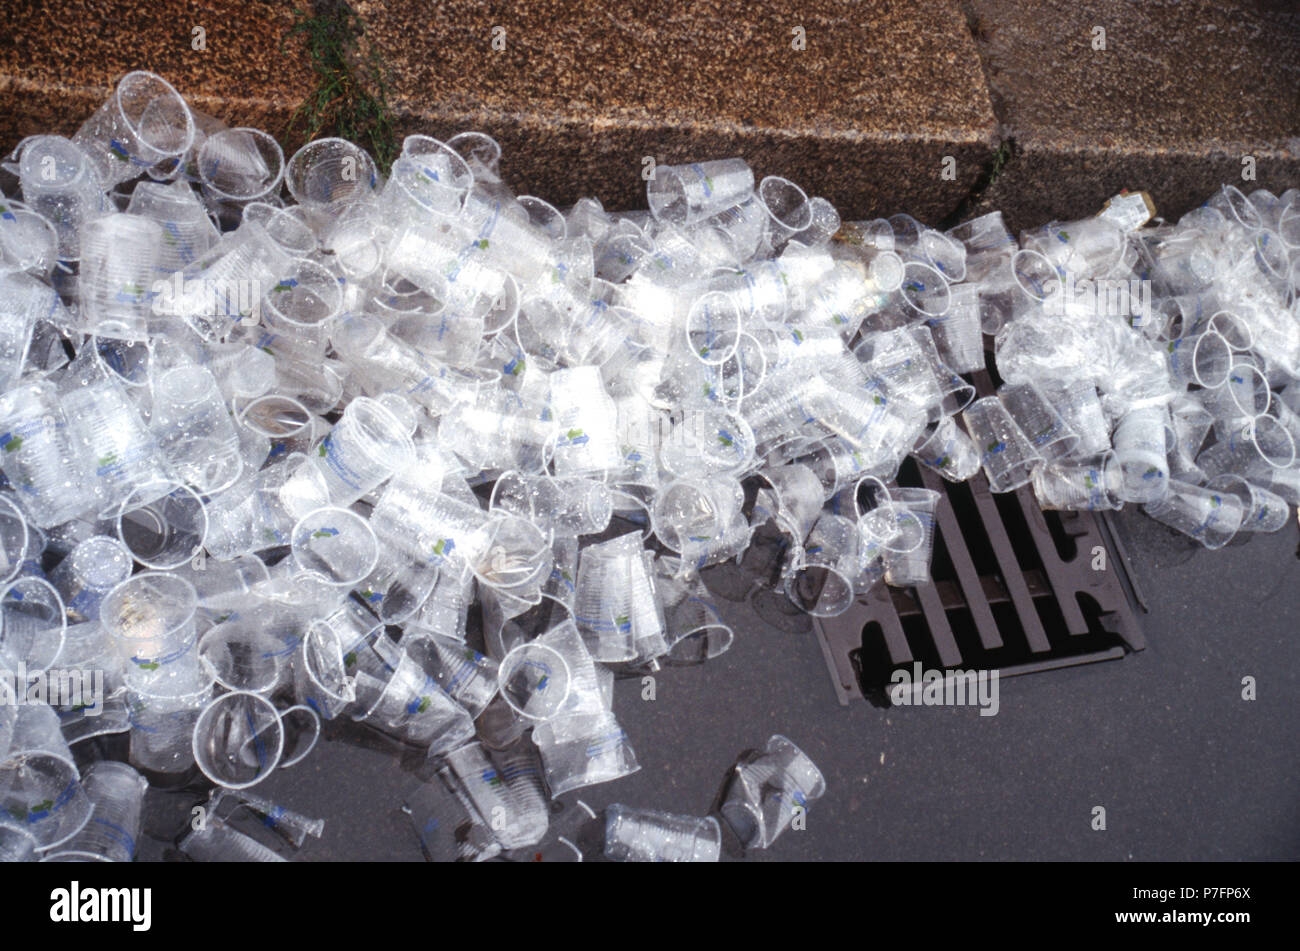 Plastic cups in the gutter, garbage, Berlin, Germany Stock Photo